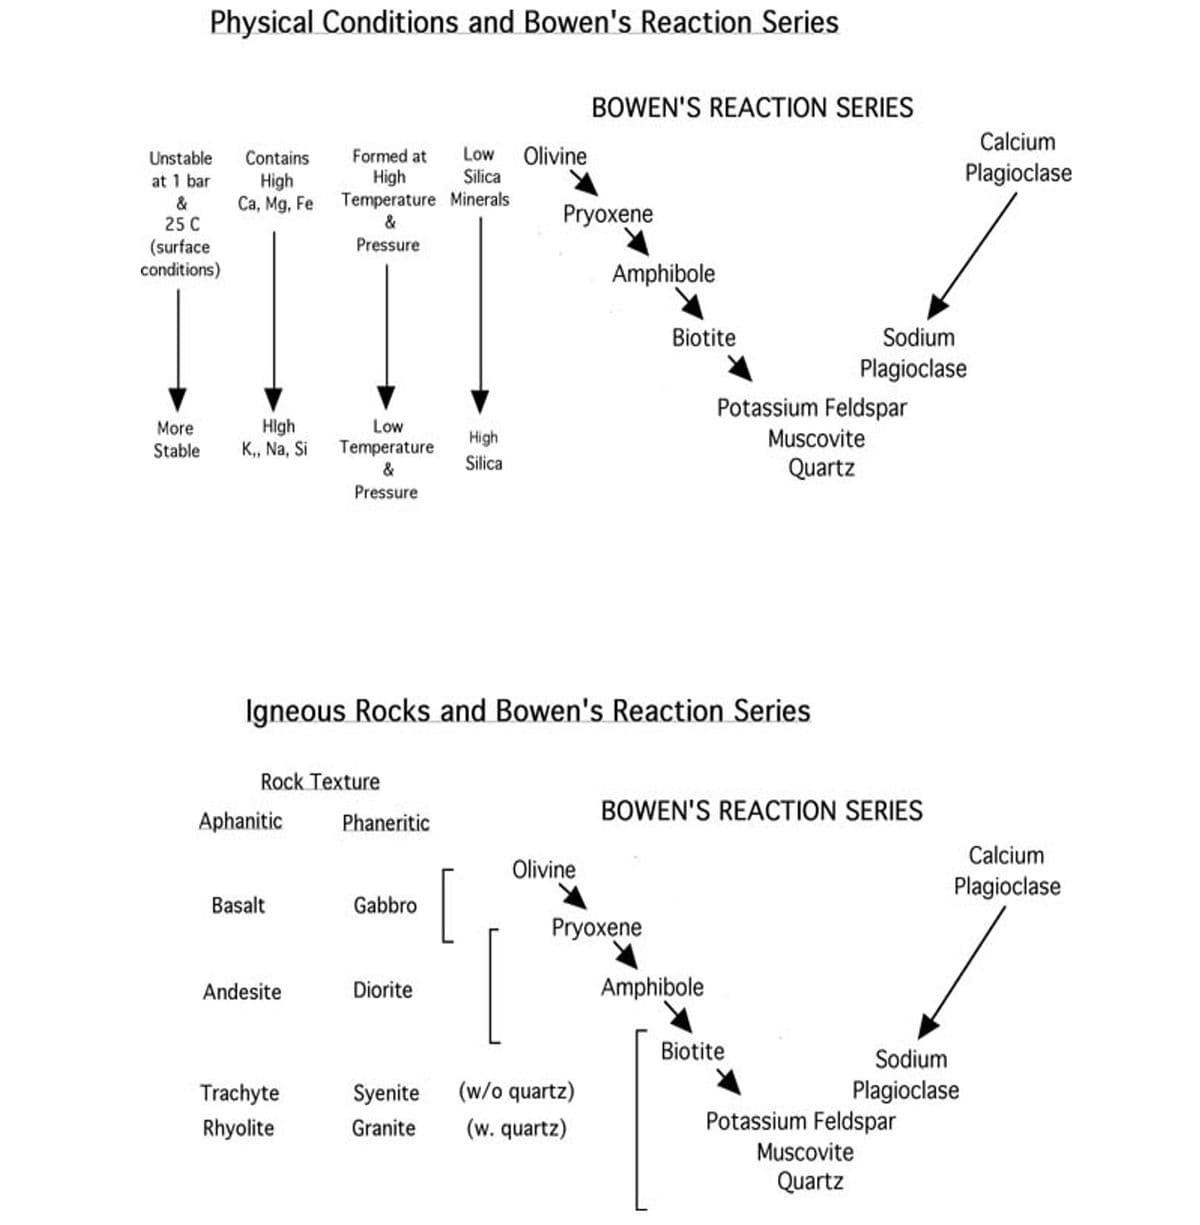 Physical Conditions and Bowen's Reaction Series
Unstable Contains
at 1 bar
High
Ca, Mg, Fer
&
25 C
(surface
conditions)
More
Stable
High
K,, Na, Si
Aphanitic
Rock Texture
Basalt
Formed at Low
High
Silica
Temperature Minerals
&
Pressure
Andesite
Low
Temperature
&
Pressure
Trachyte
Rhyolite
Phaneritic
Gabbro
High
Silica
Igneous Rocks and Bowen's Reaction Series
Diorite
Olivine
Pryoxene
BOWEN'S REACTION SERIES
Olivine
Amphibole
Syenite (w/o quartz)
Granite (w. quartz)
Biotite
Pryoxene
Potassium Feldspar
Amphibole
BOWEN'S REACTION SERIES
Sodium
Plagioclase
Muscovite
Quartz
Biotite
Calcium
Plagioclase
Sodium
Plagioclase
Potassium Feldspar
Muscovite
Quartz
Calcium
Plagioclase